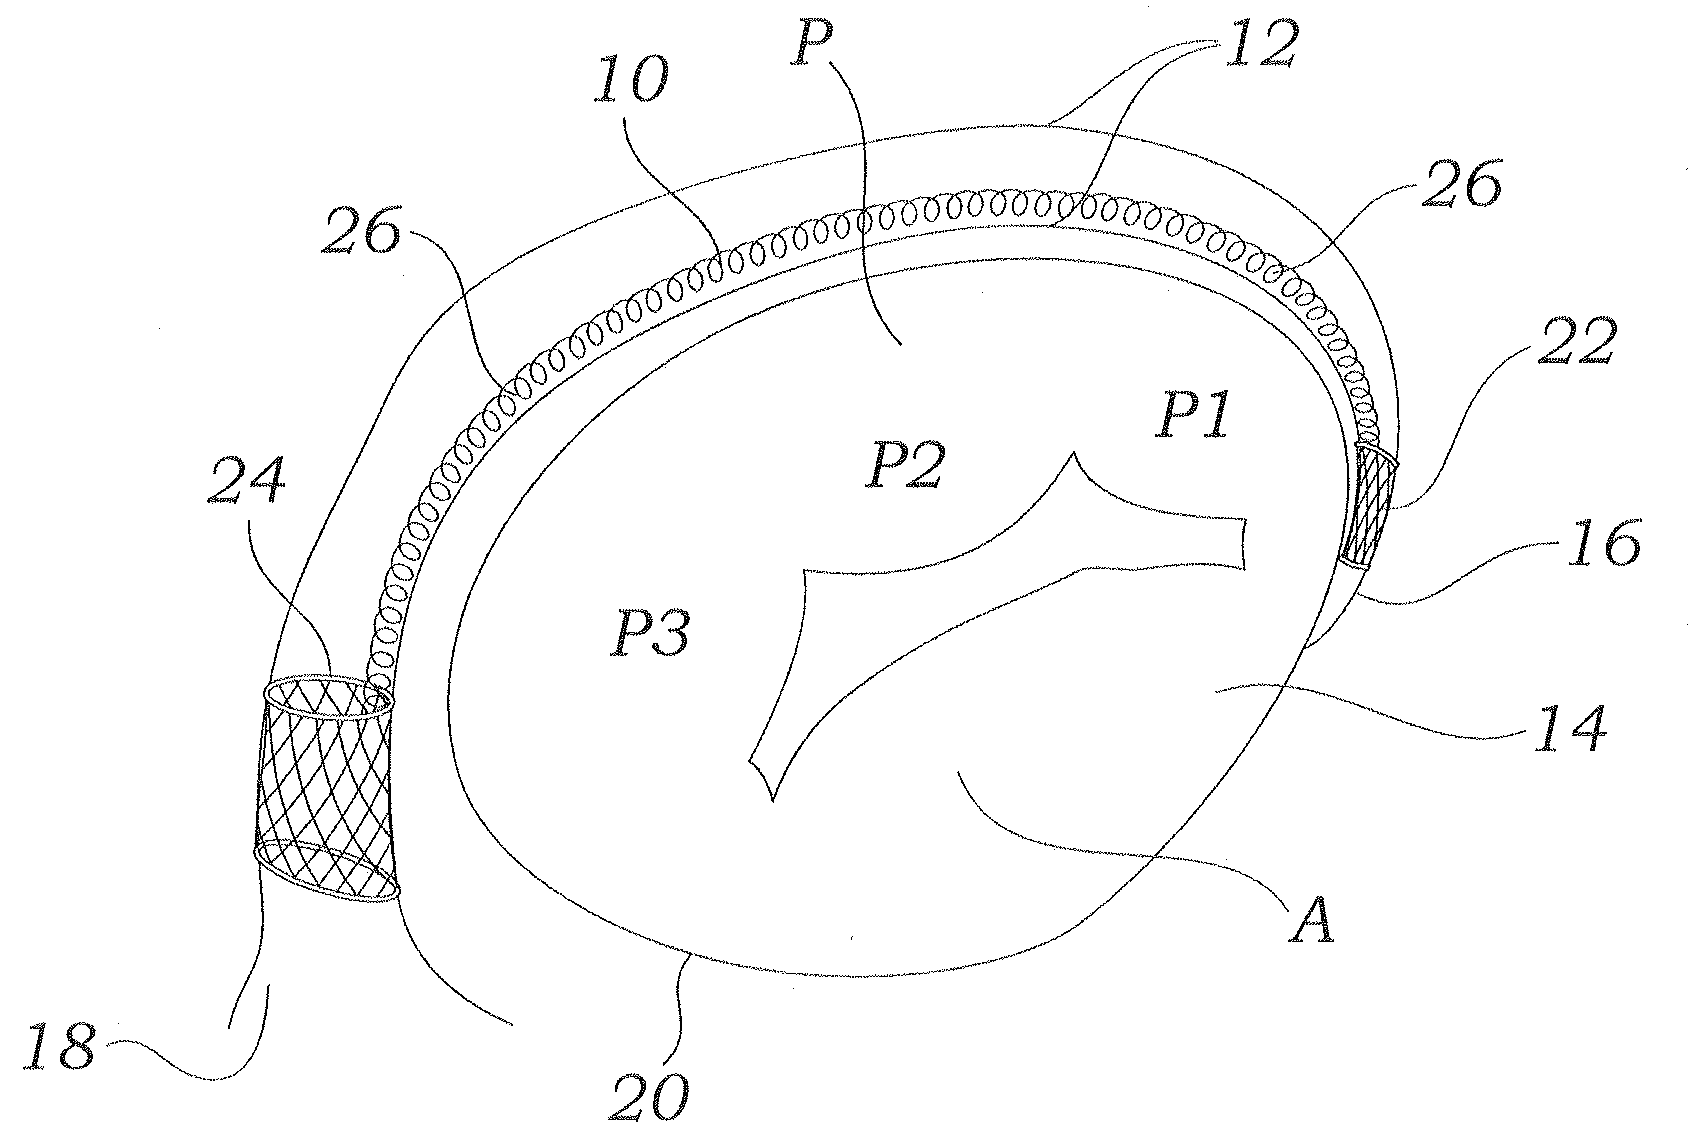 Coiled implant for mitral valve repair